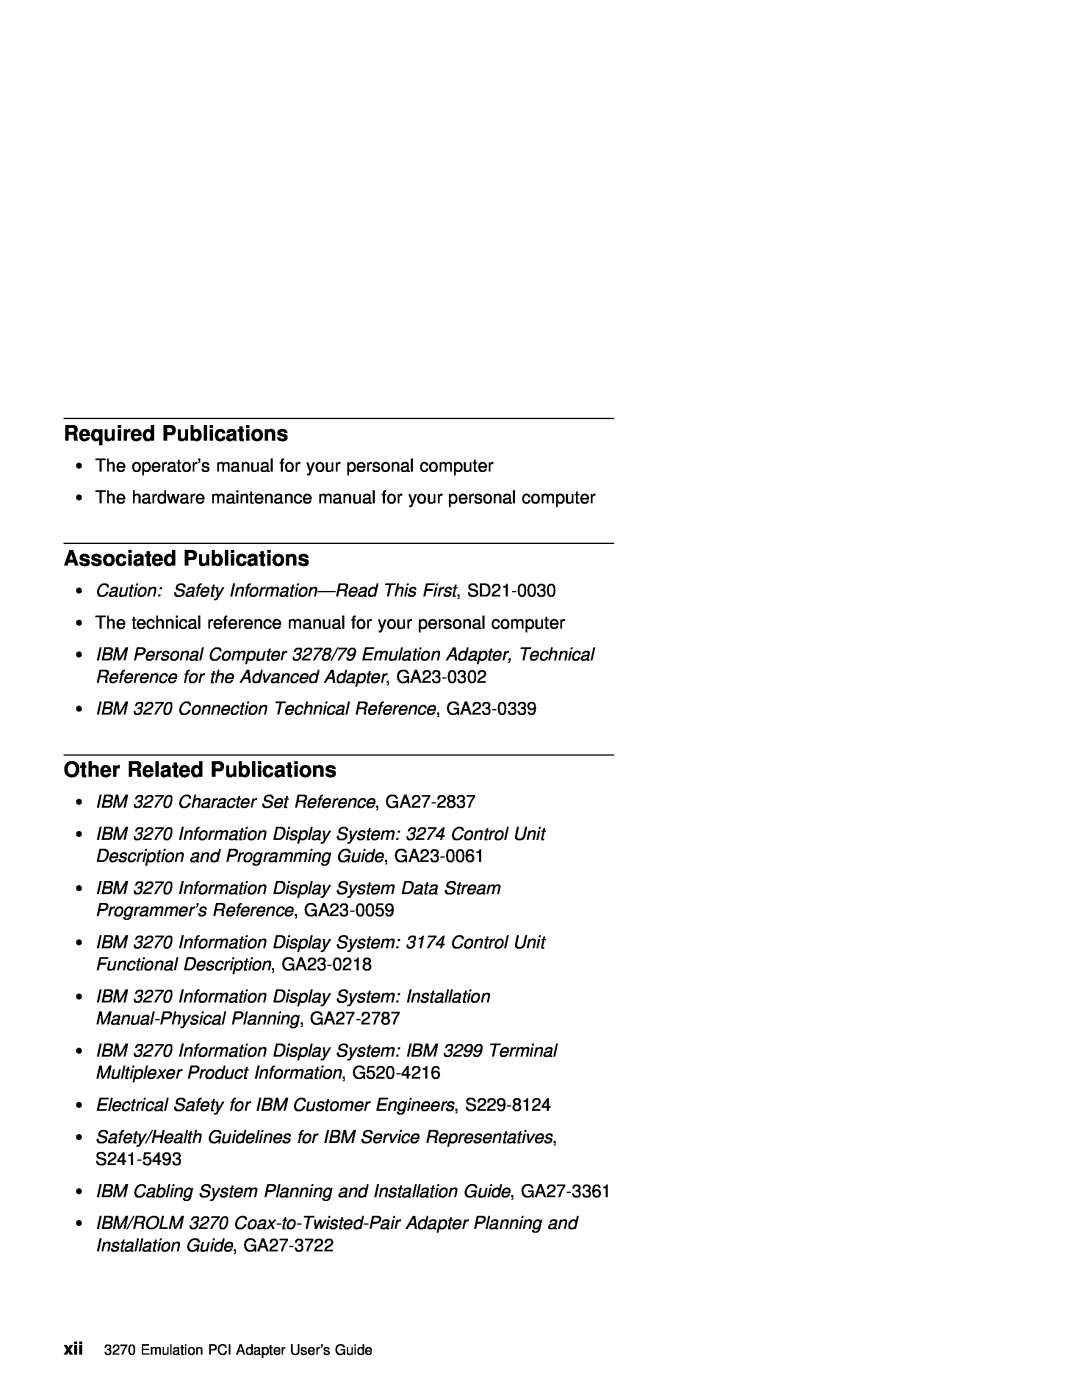 IBM 3270 manual Required Publications, Associated Publications, Other Related Publications 